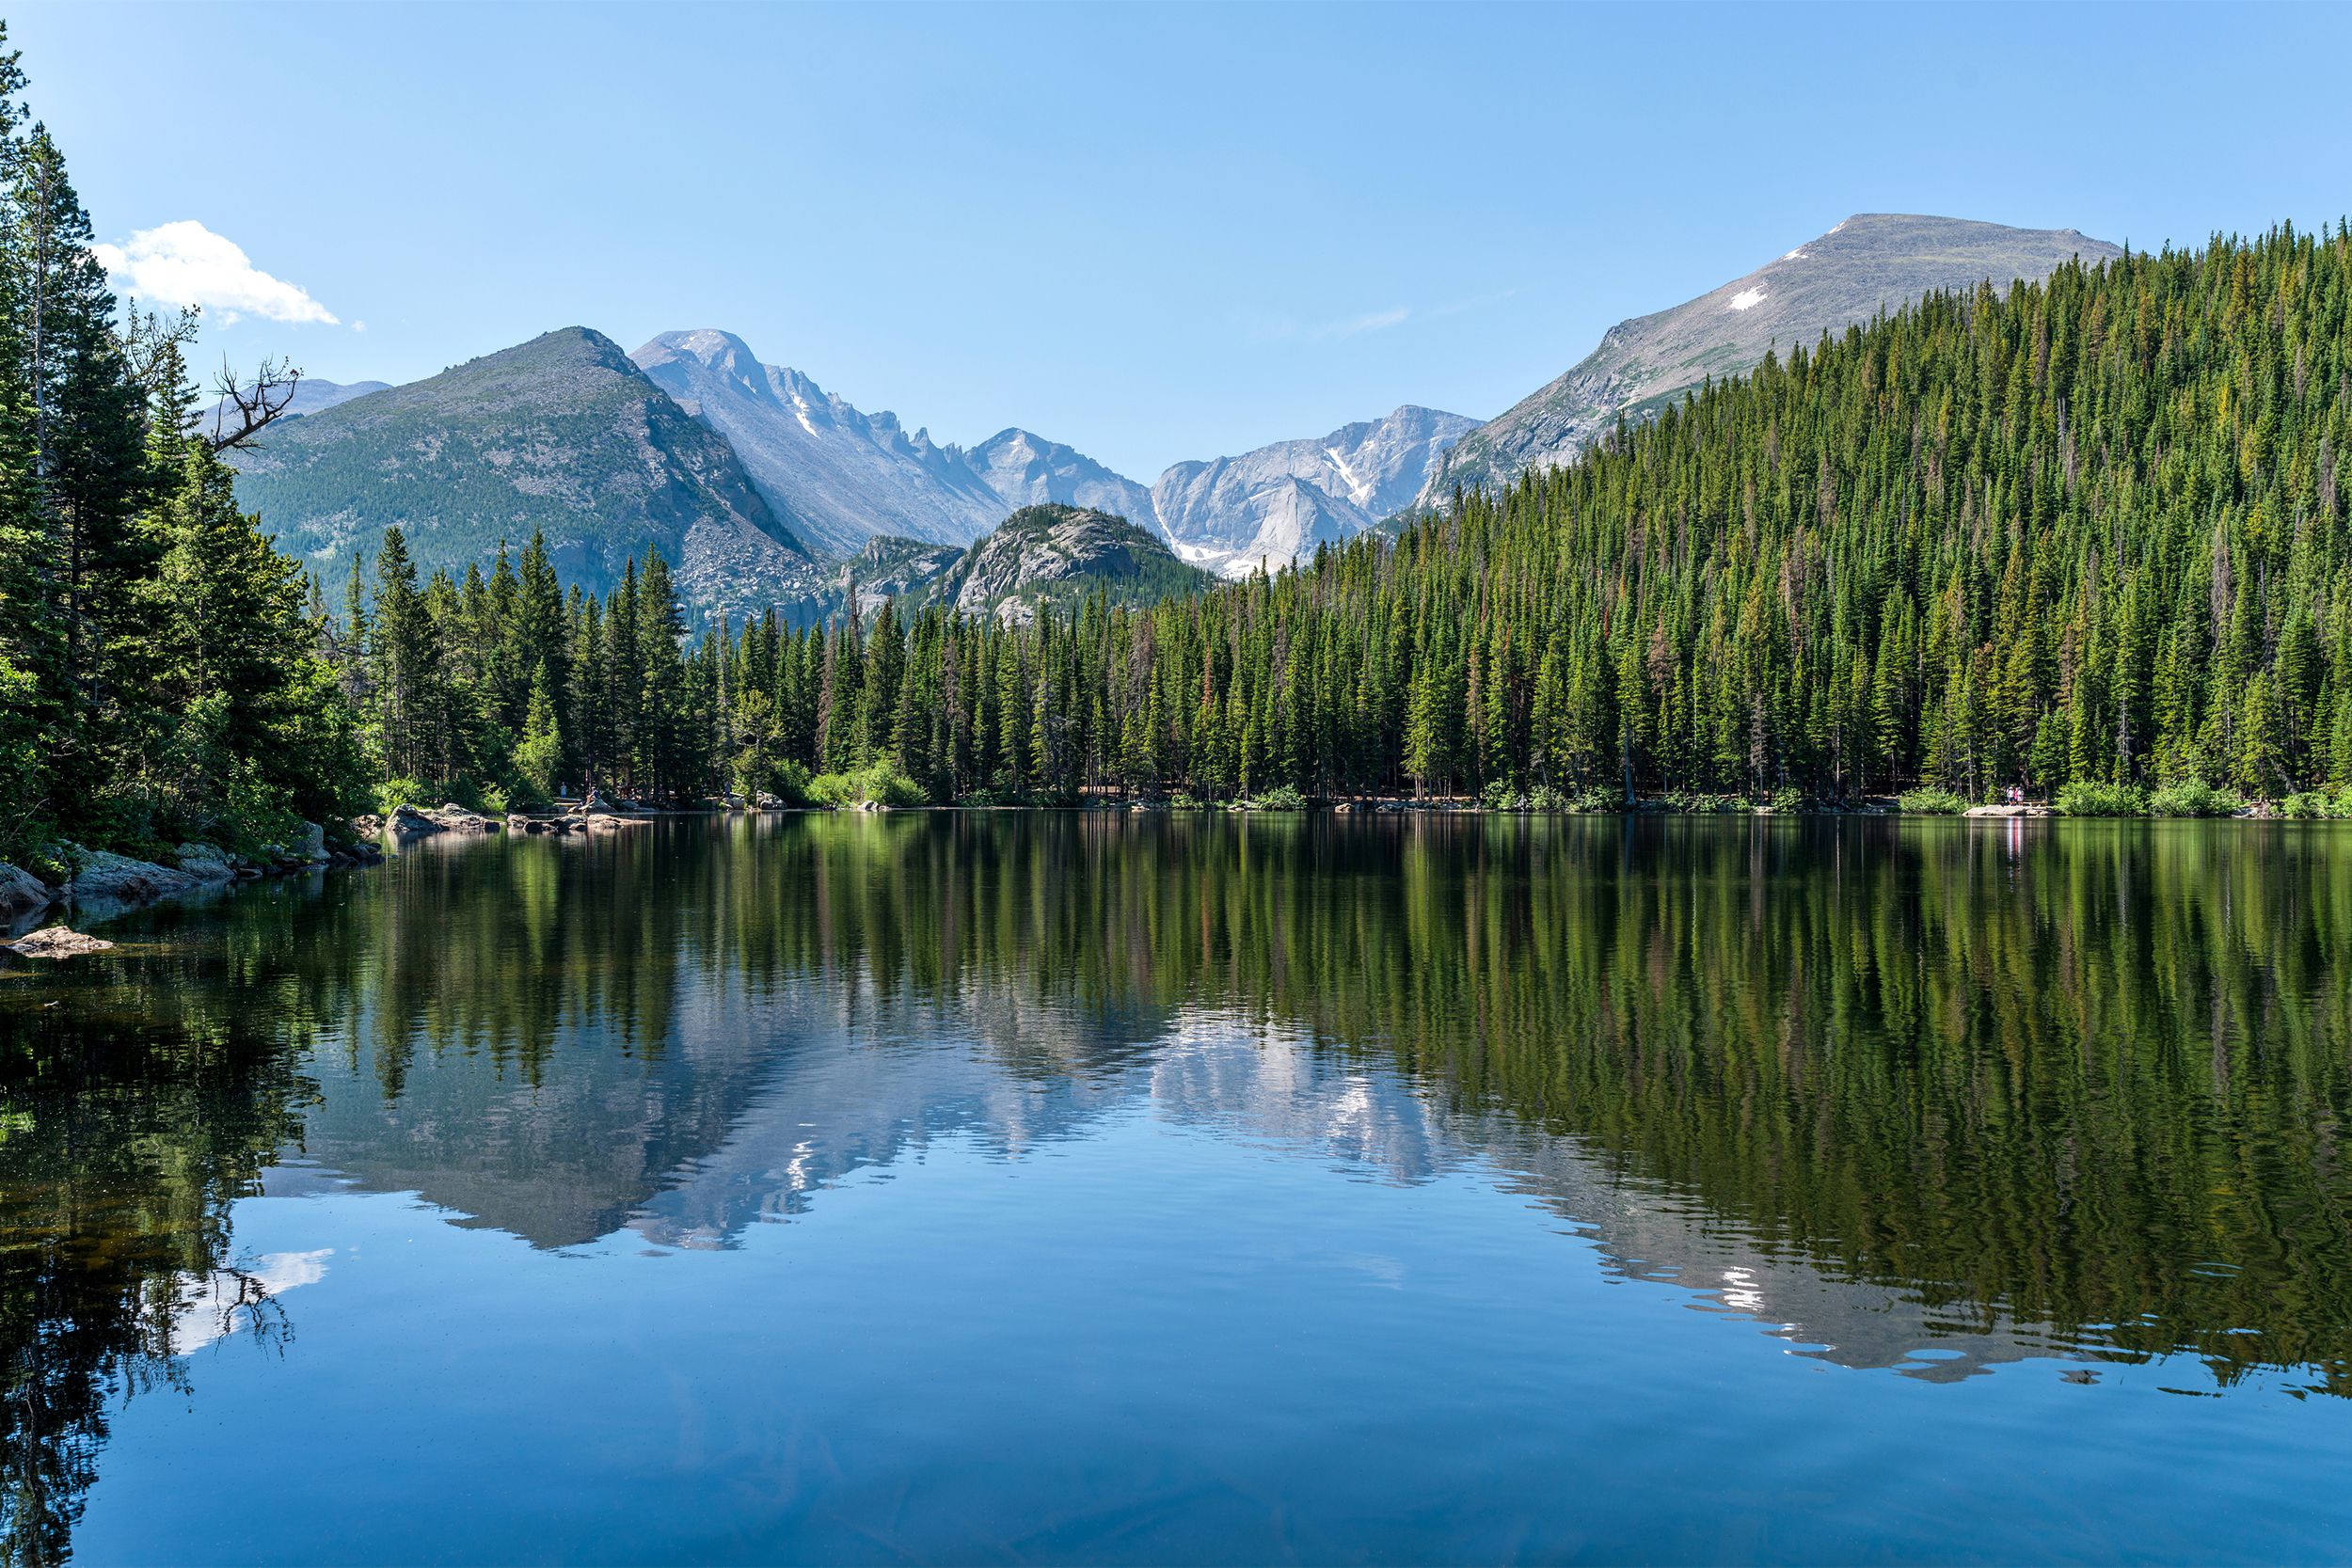 <p>The majestic natural beauty within <a href="https://www.nps.gov/romo/index.htm">Rocky Mountain National Park's</a> 415 square miles includes subalpine and alpine forests, tundra, alpine lakes, forested valleys, and a variety of wildflowers and wildlife. </p>